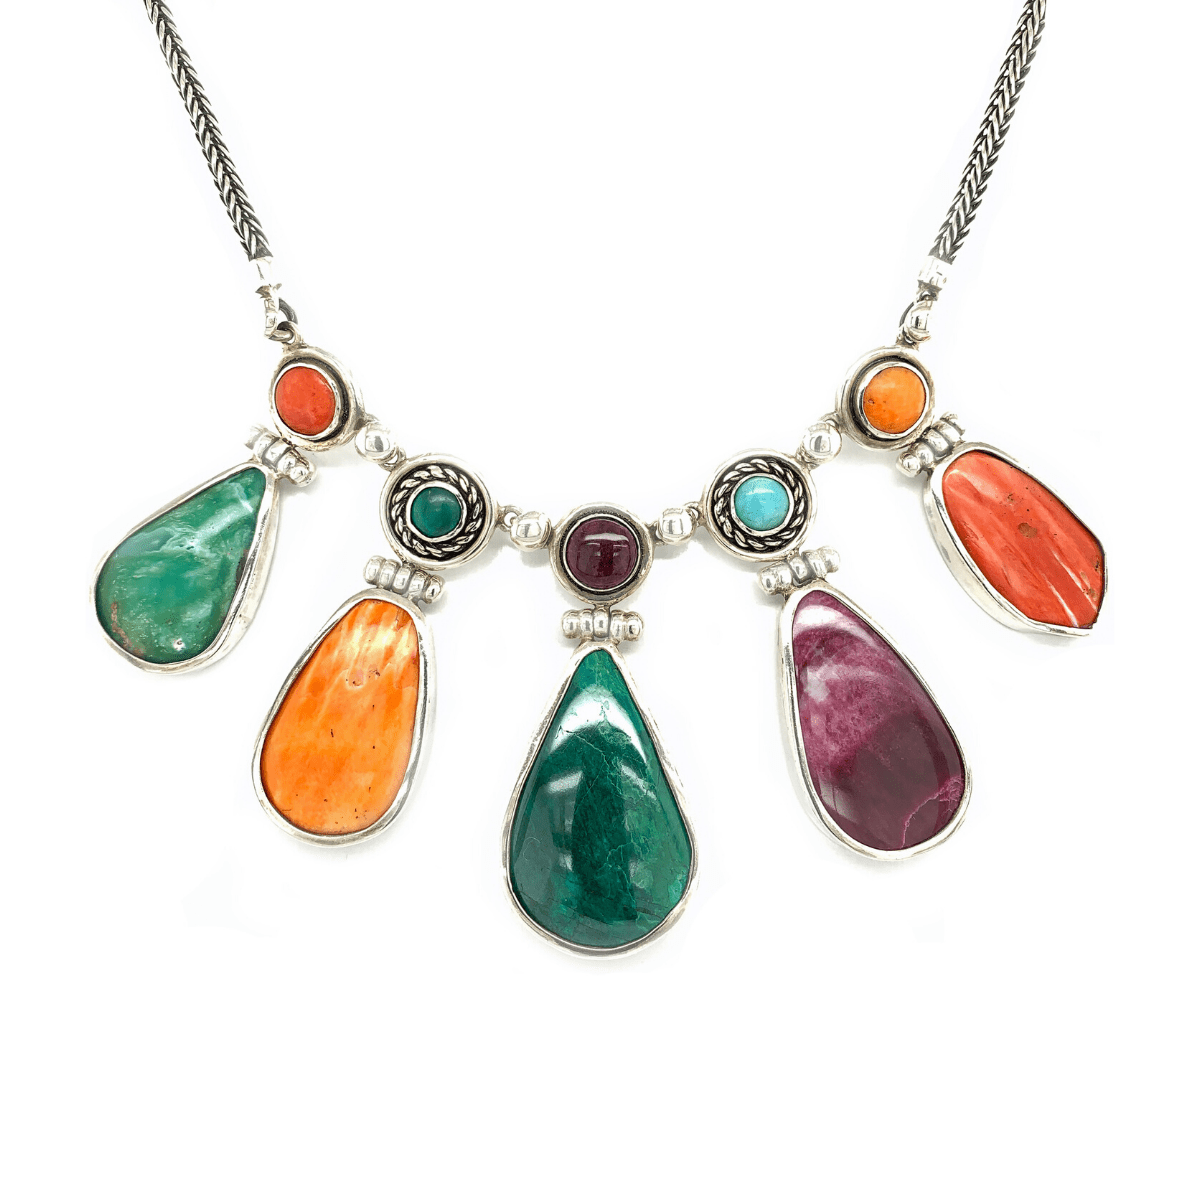 Multi-Colored Natural Gemstones & Sterling Silver Necklace - Qinti - The Peruvian Shop